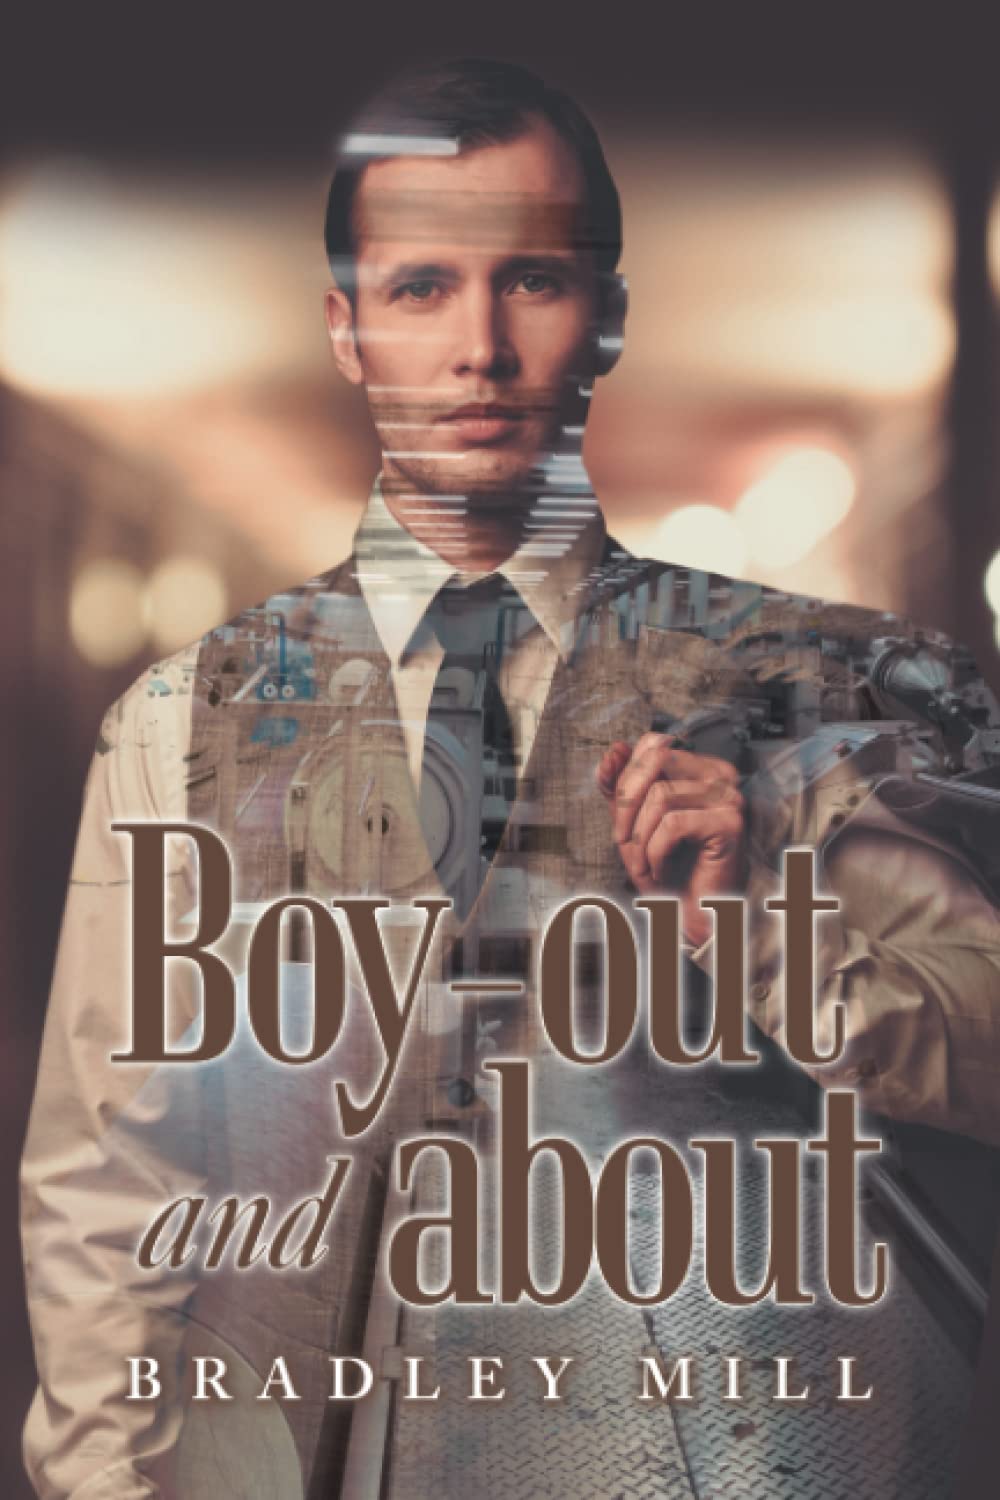 Book cover of 'Boy - out and about'